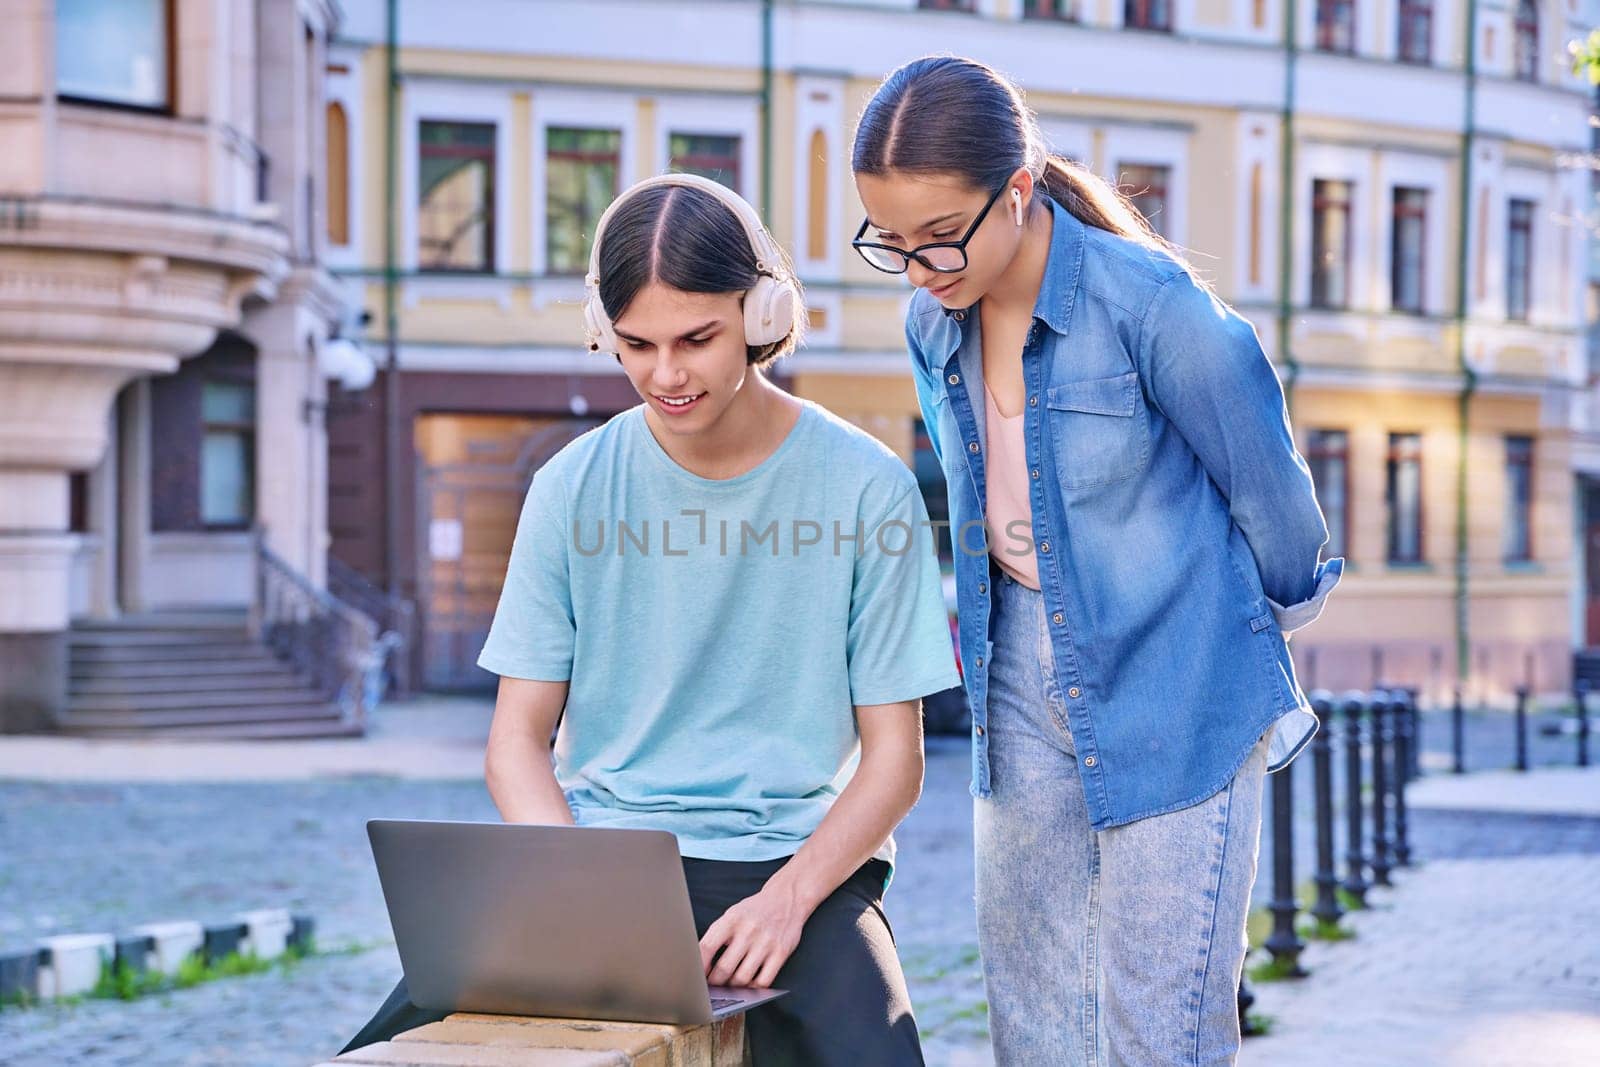 Teenage male and female using laptop for study, leisure, outdoor on city street. Guy and girl teenagers looking together at aptop screen. Lifestyle, technology, youth, education, city life concept